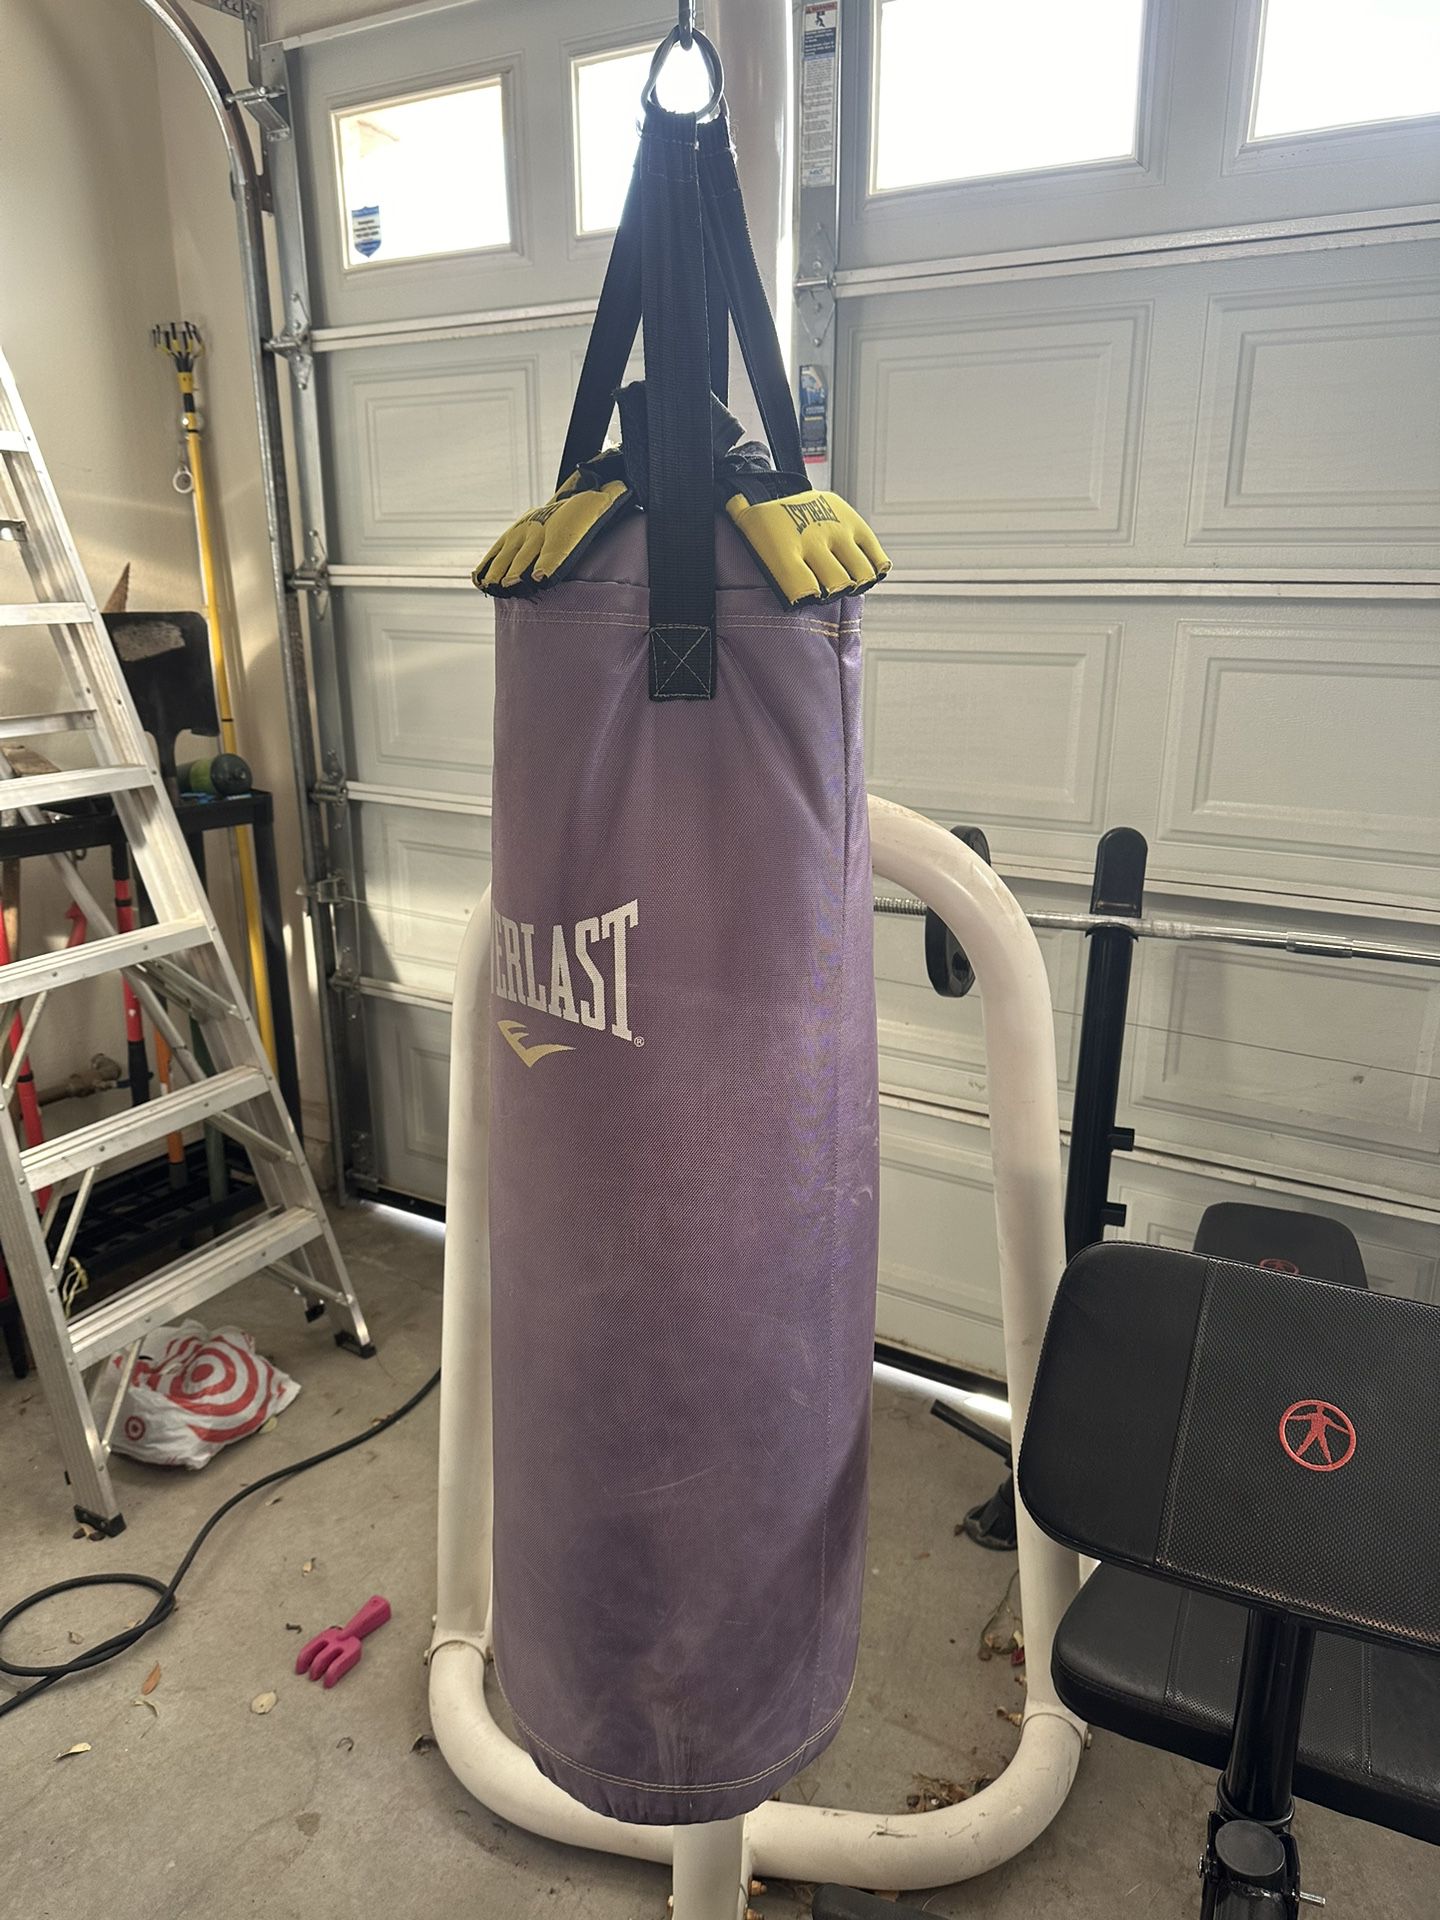 Everlast Punching Bag, Stand, and Gloves. 